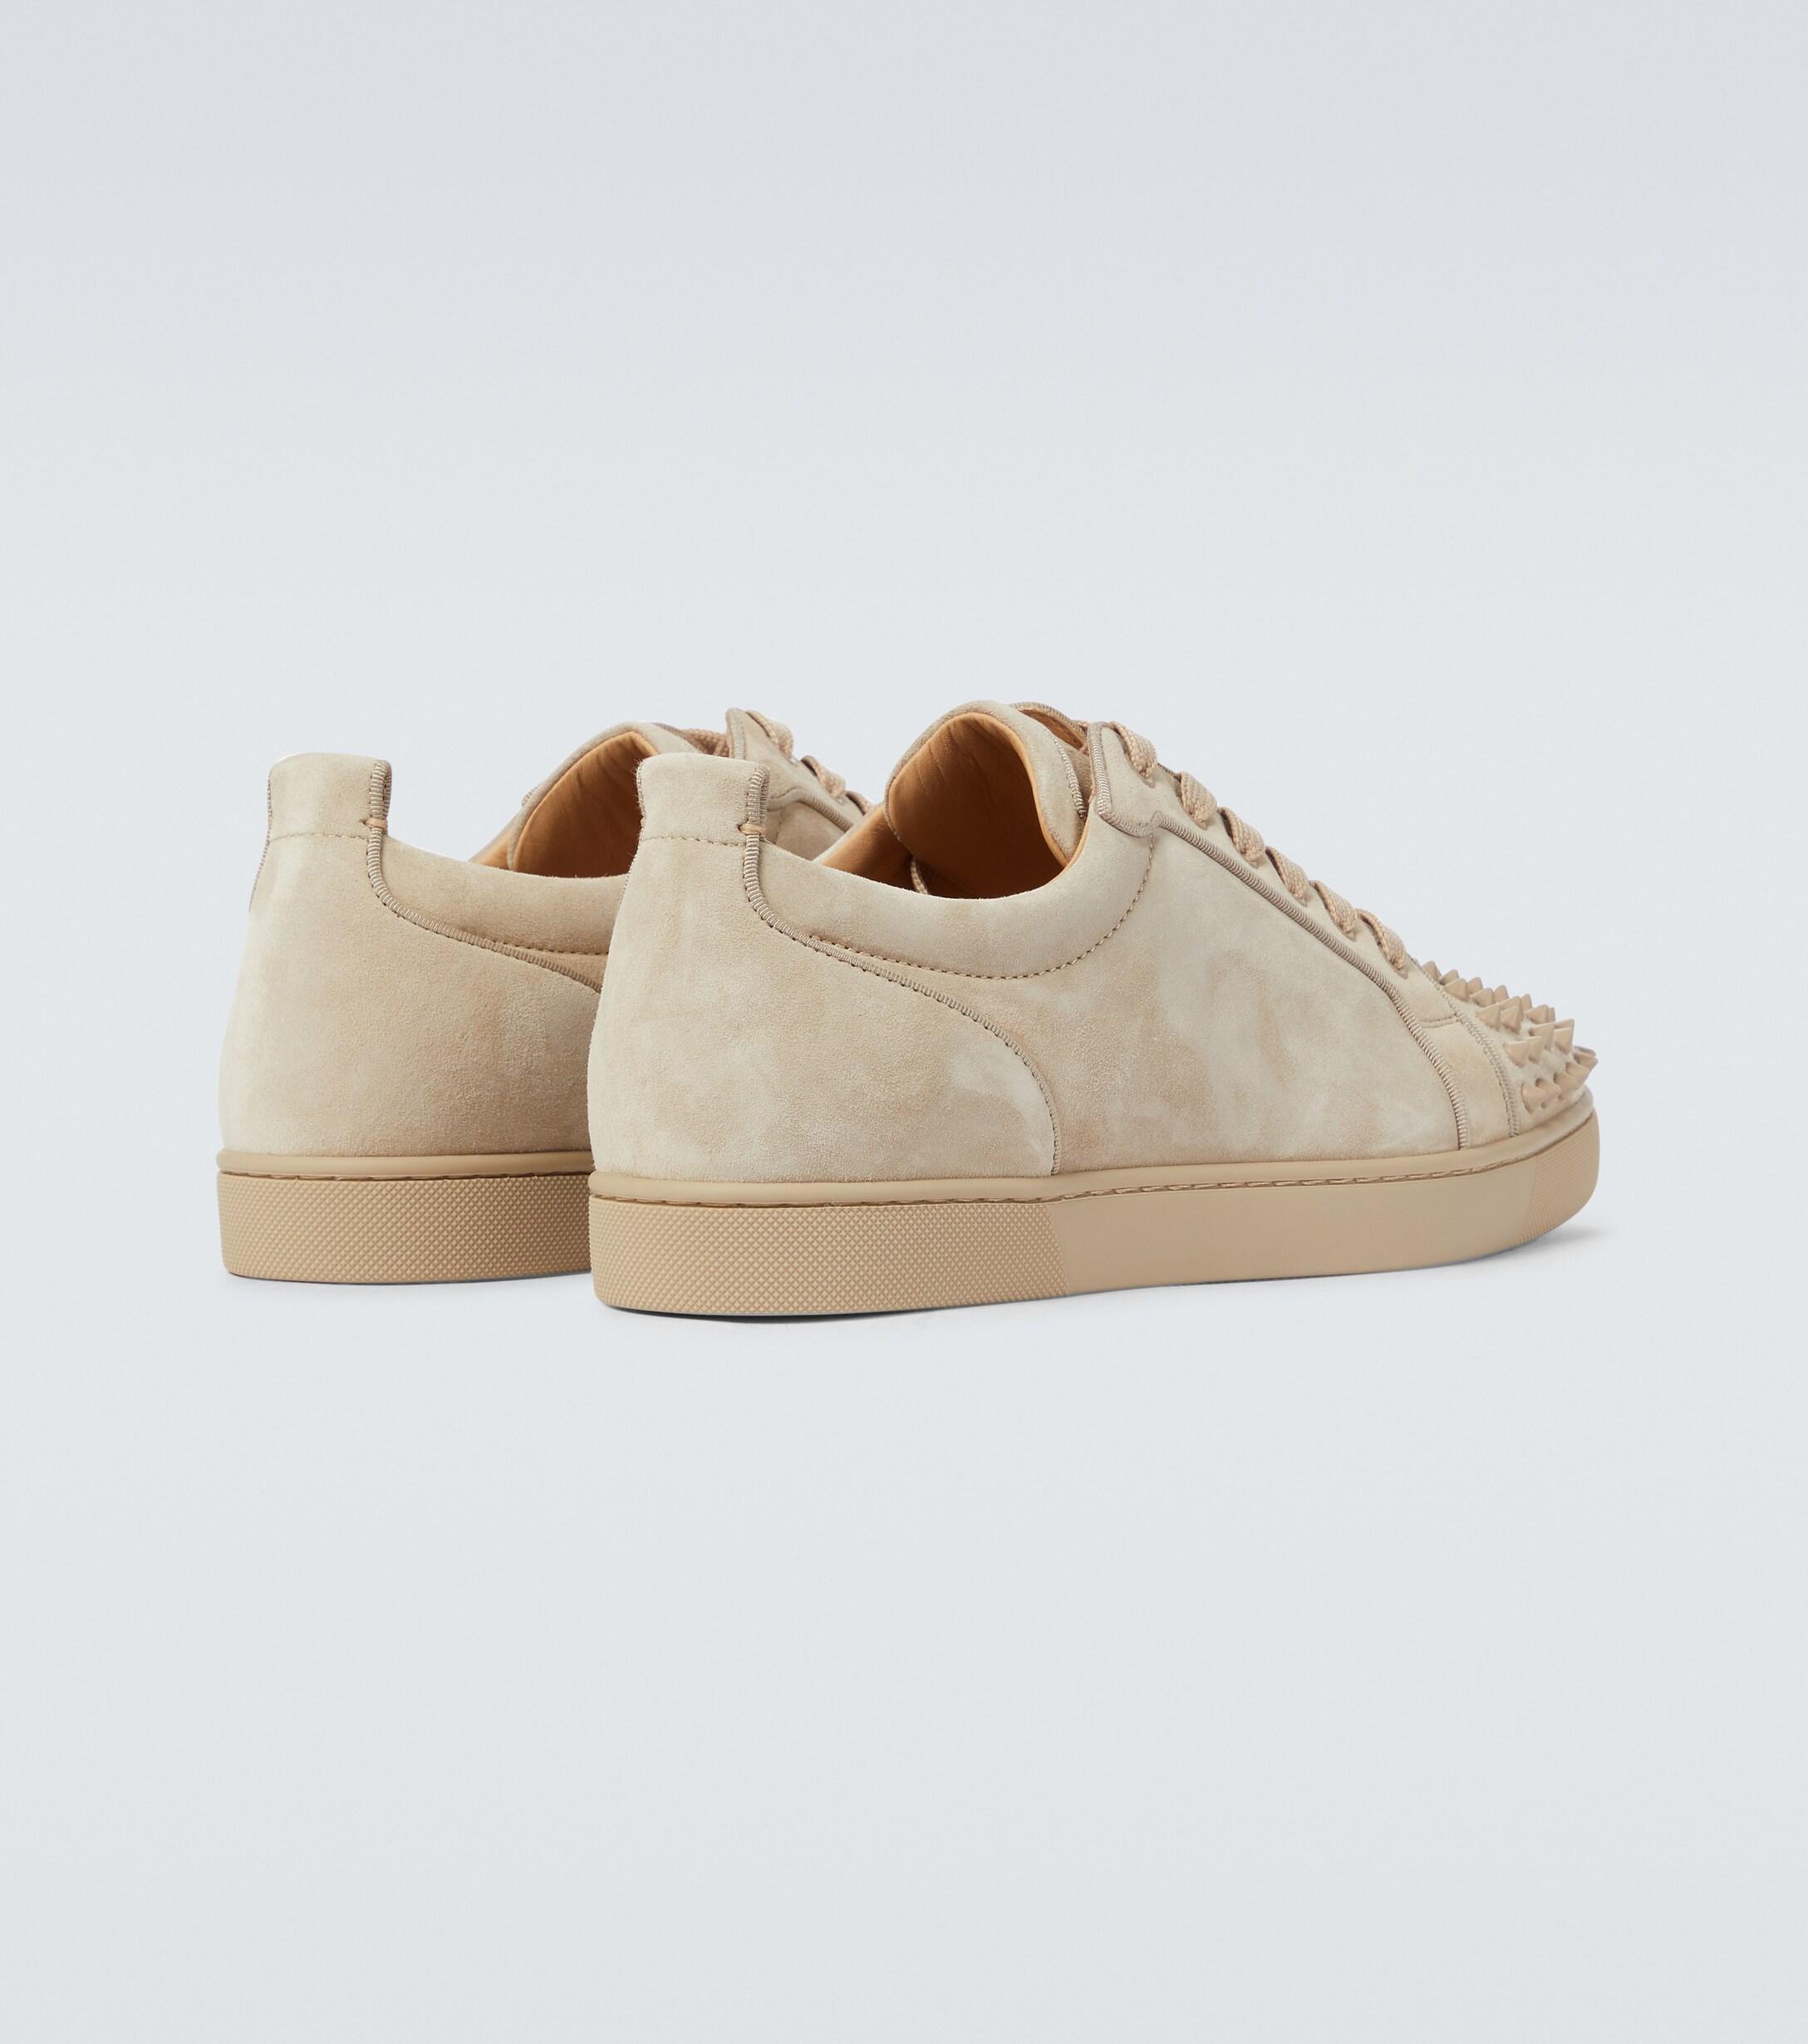 Christian Louboutin Suede Louis Junior Spikes Orlato Sneakers in Beige  (Natural) for Men - Lyst